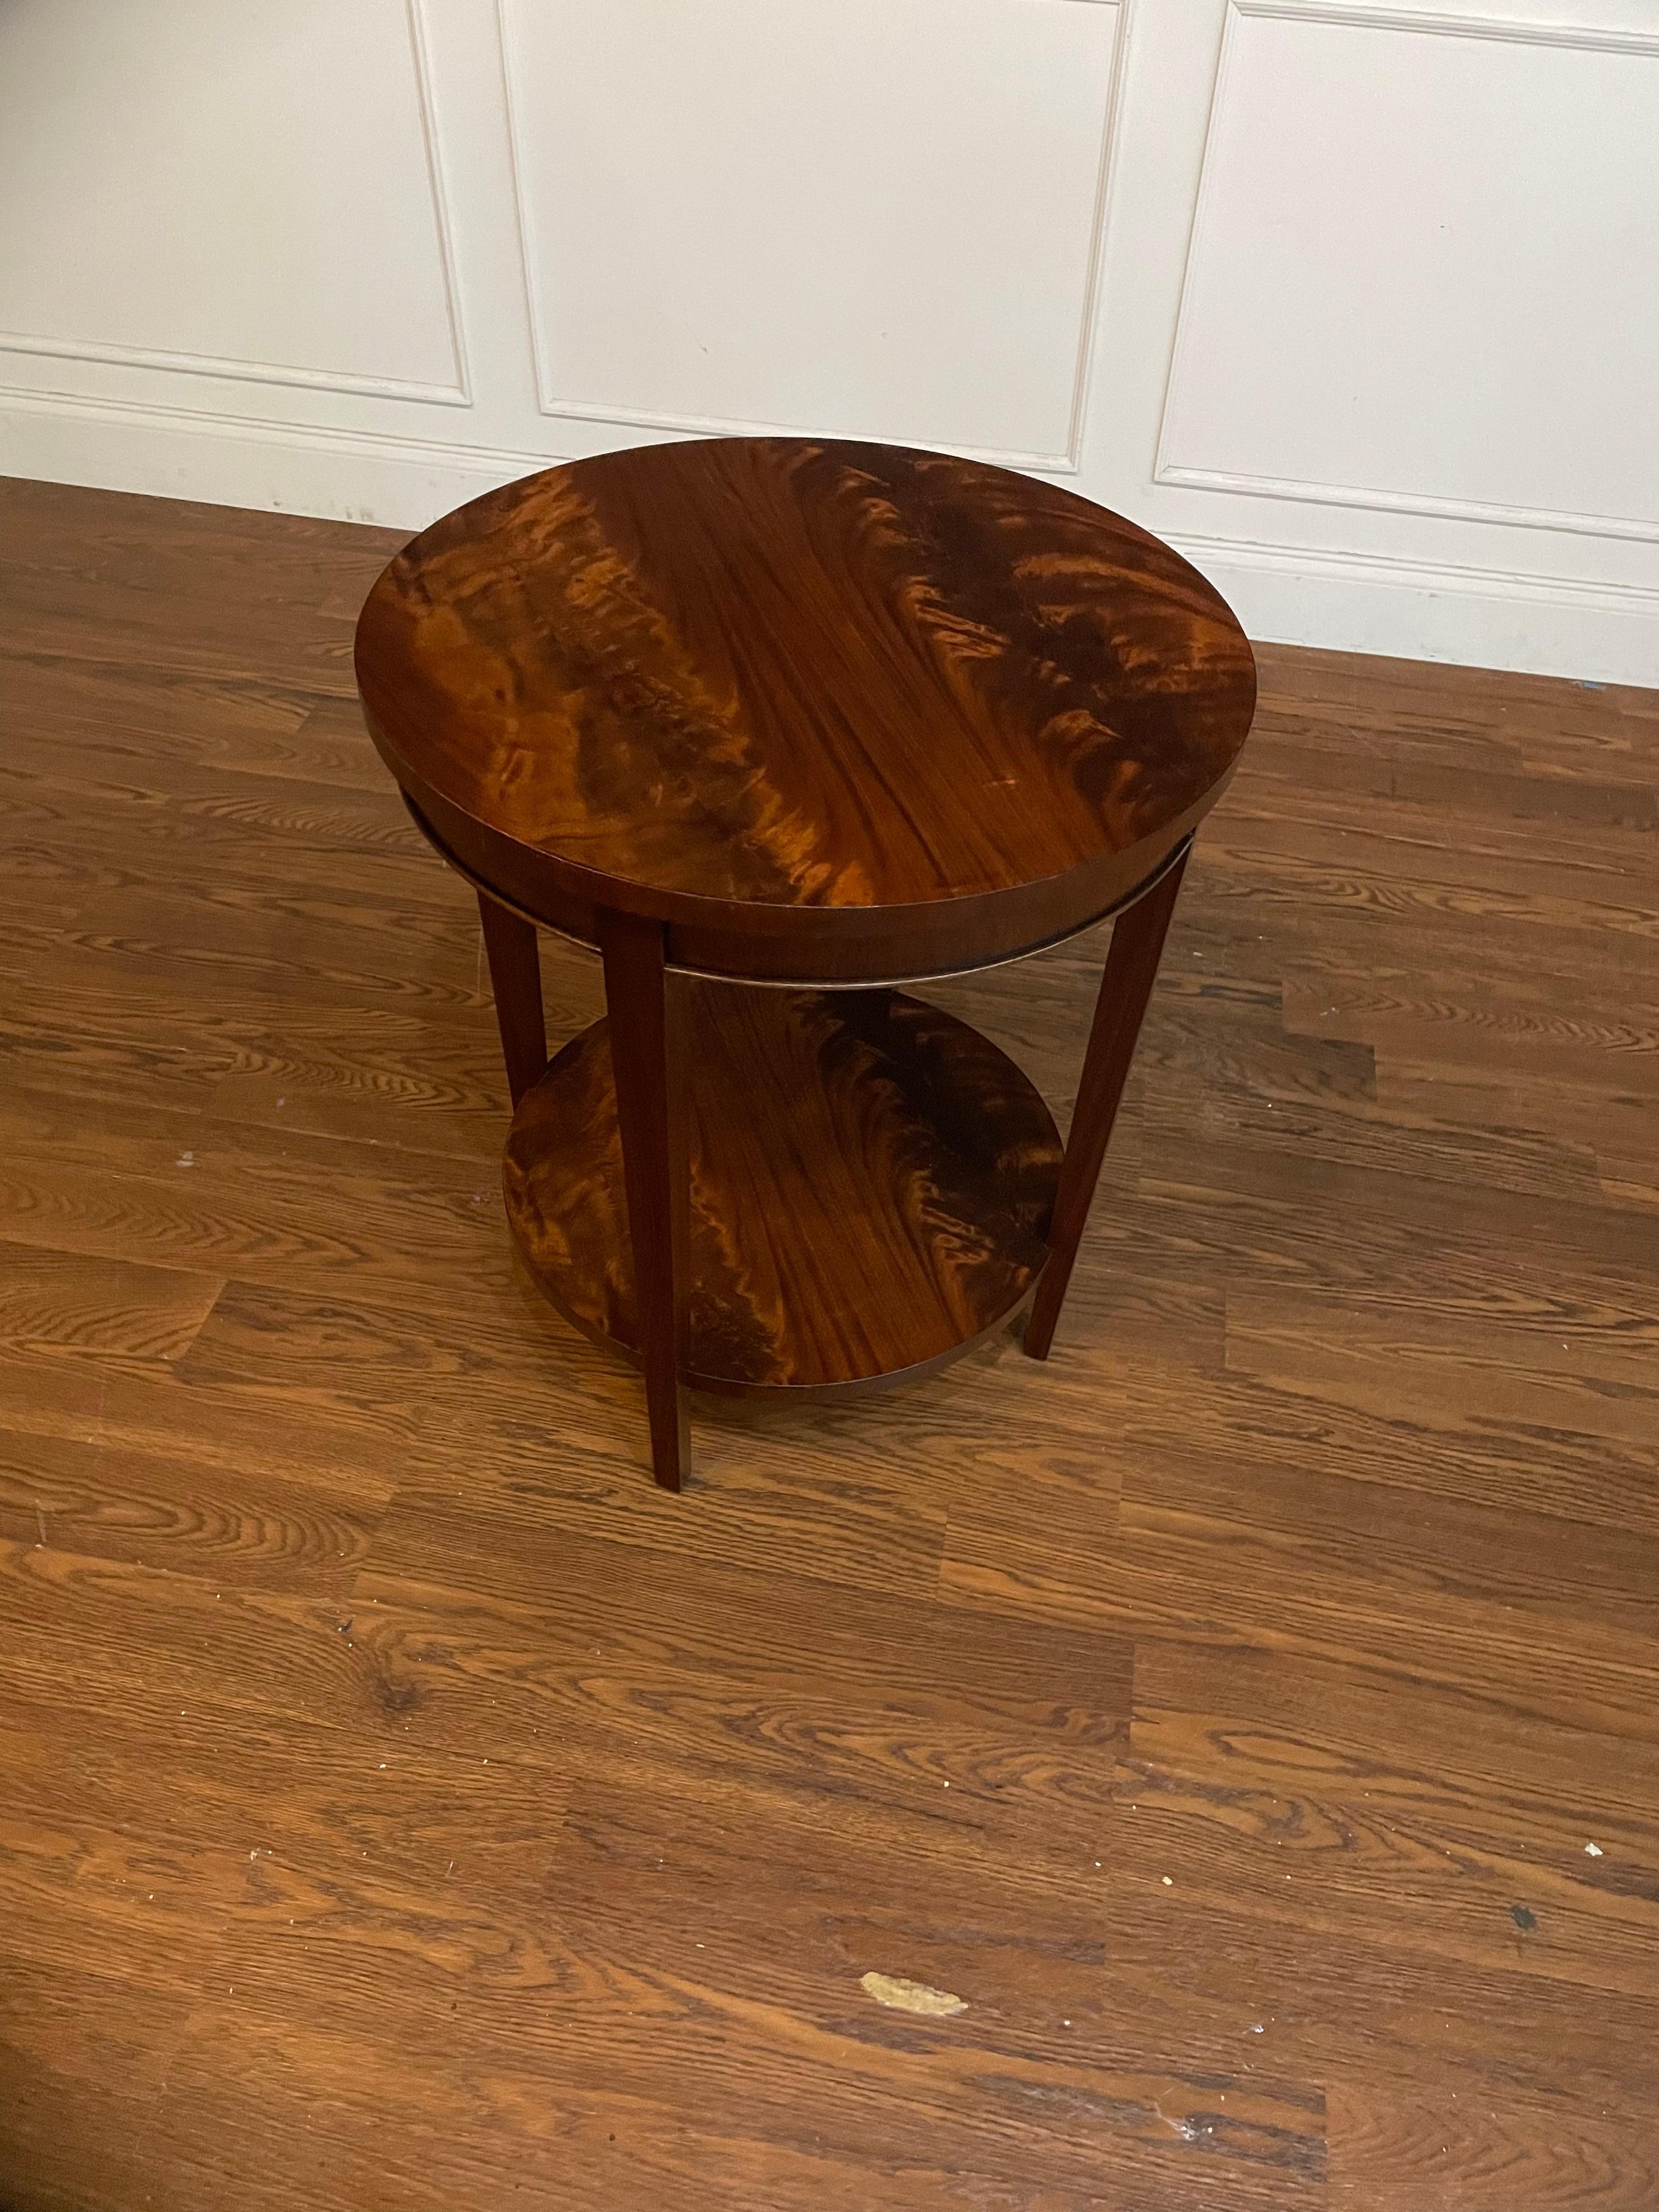 This is a round Hepplewhite style mahogany side table made to order in our shop in Suwanee, Georgia.  It features classic Hepplewhite styling with square tapered legs.  The top and the lower shelf have a reverse slip match pattern of swirly crotch